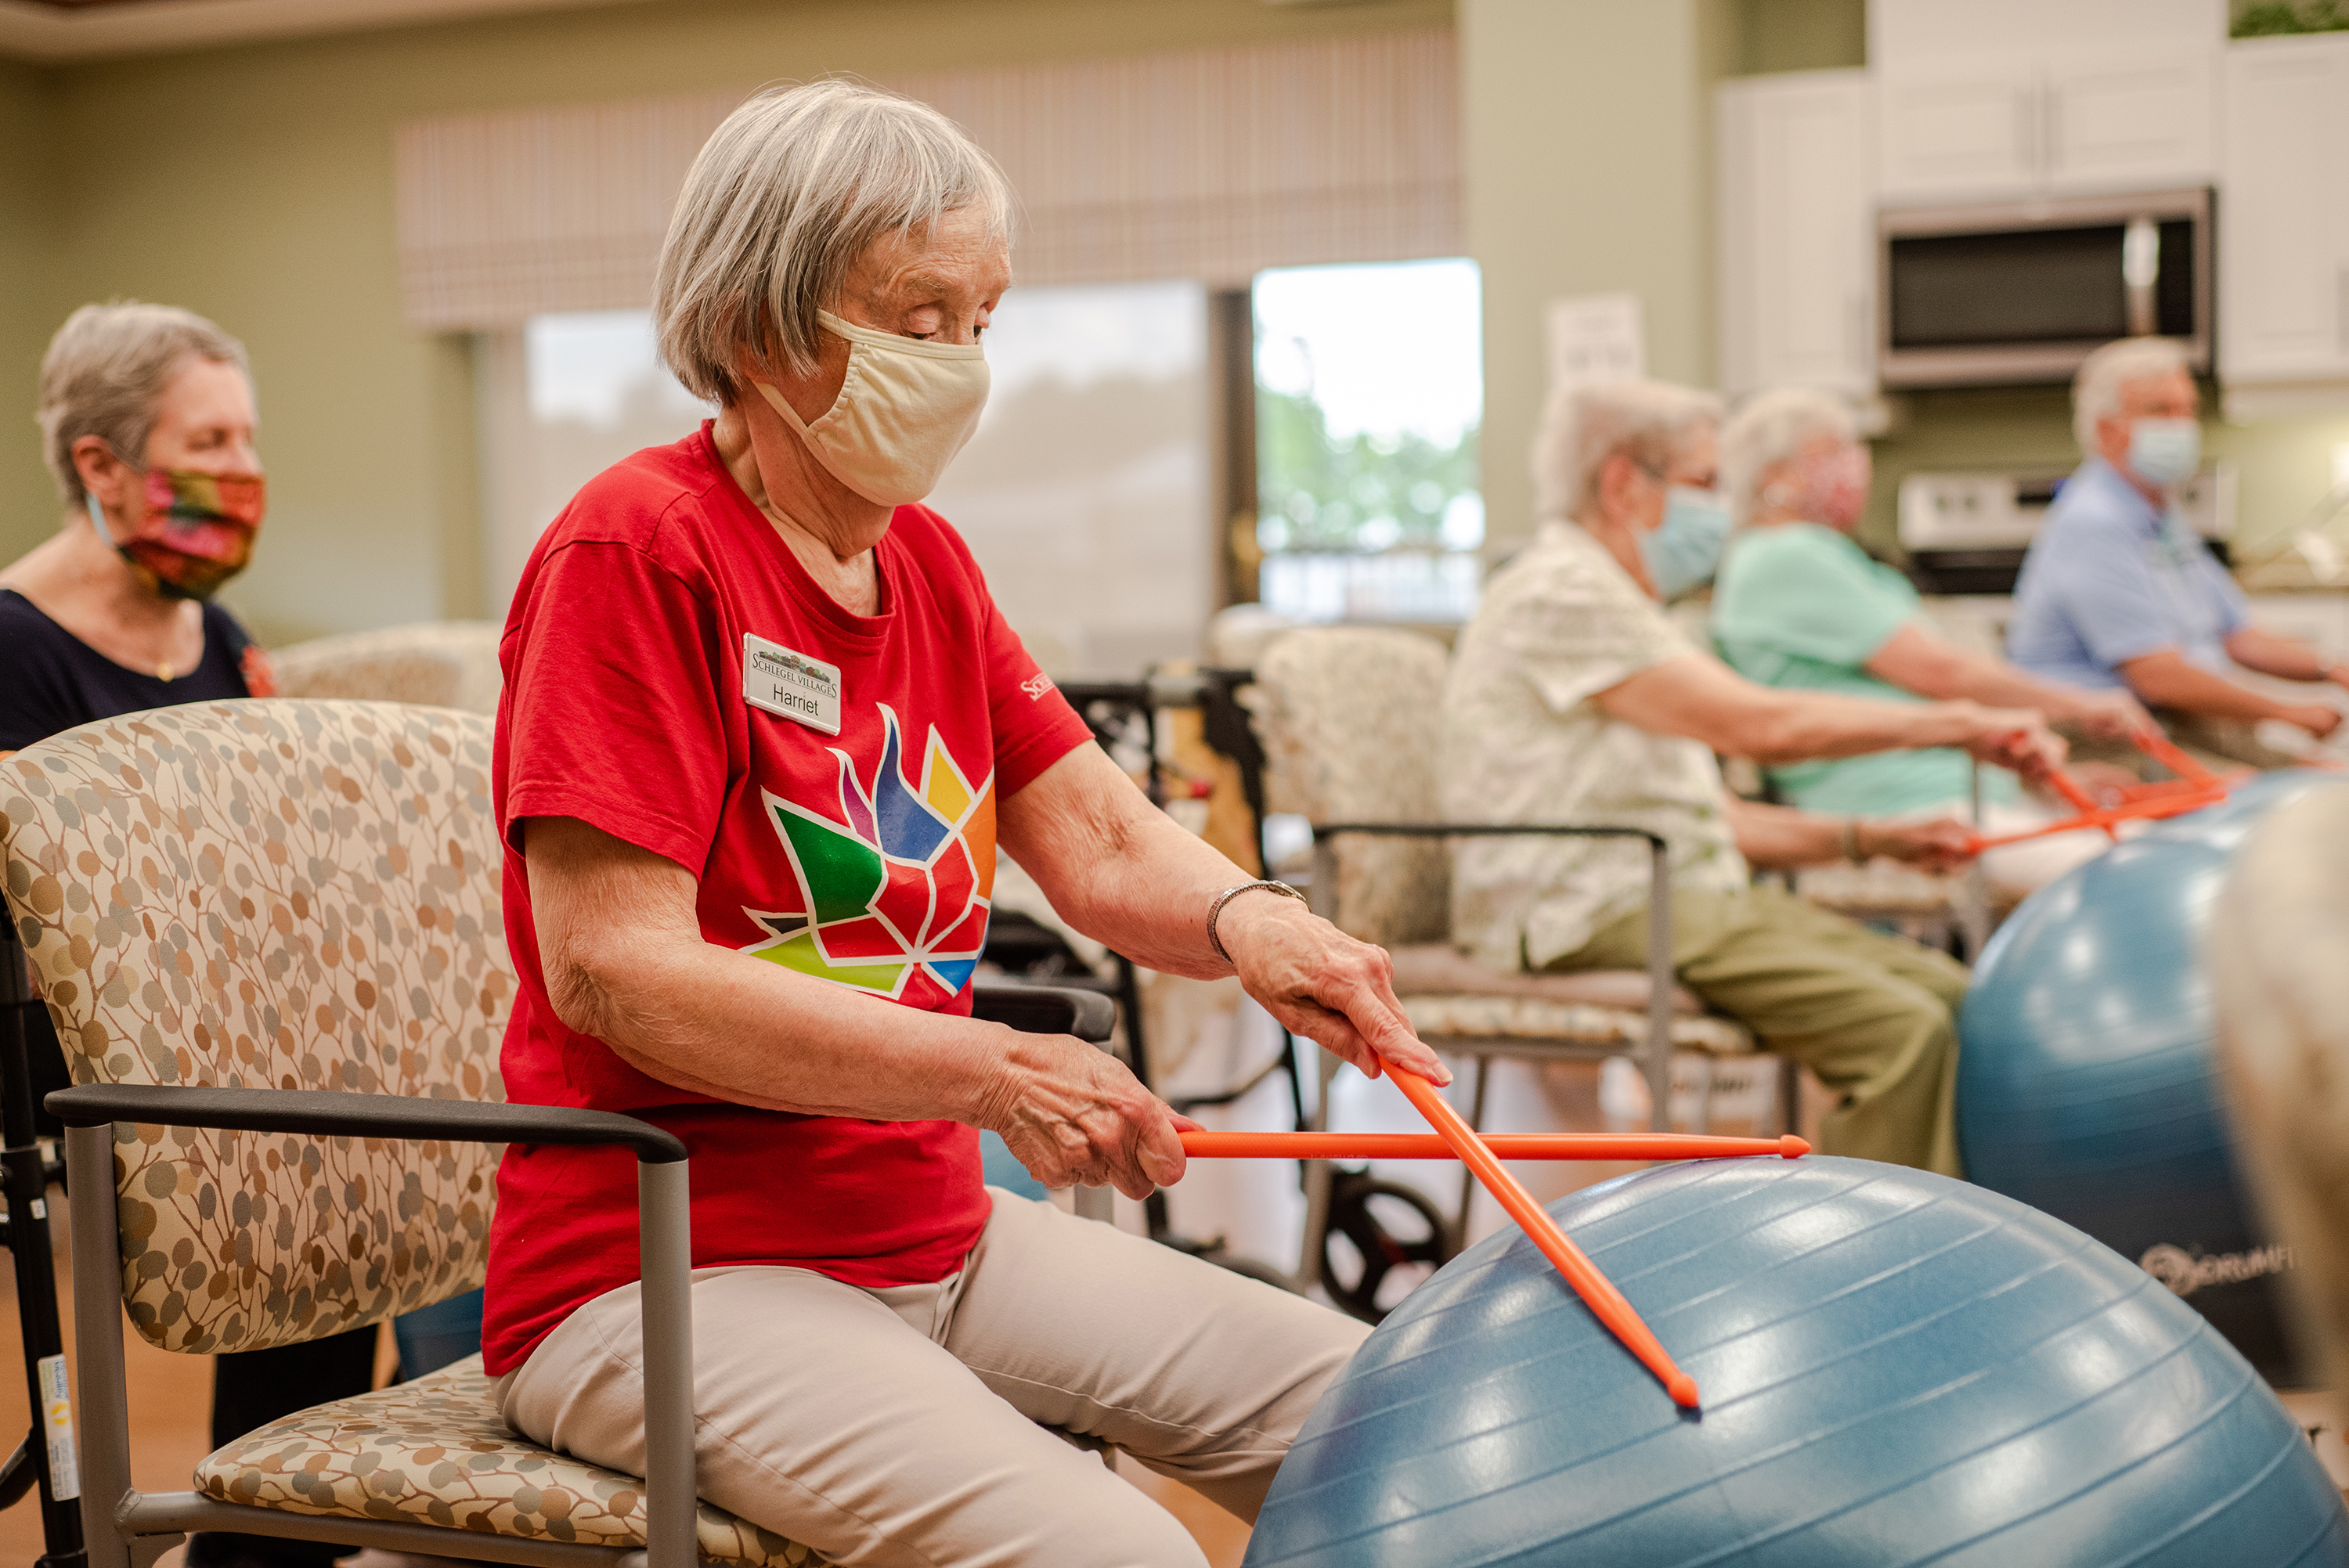 Residents participating in a drum fit class